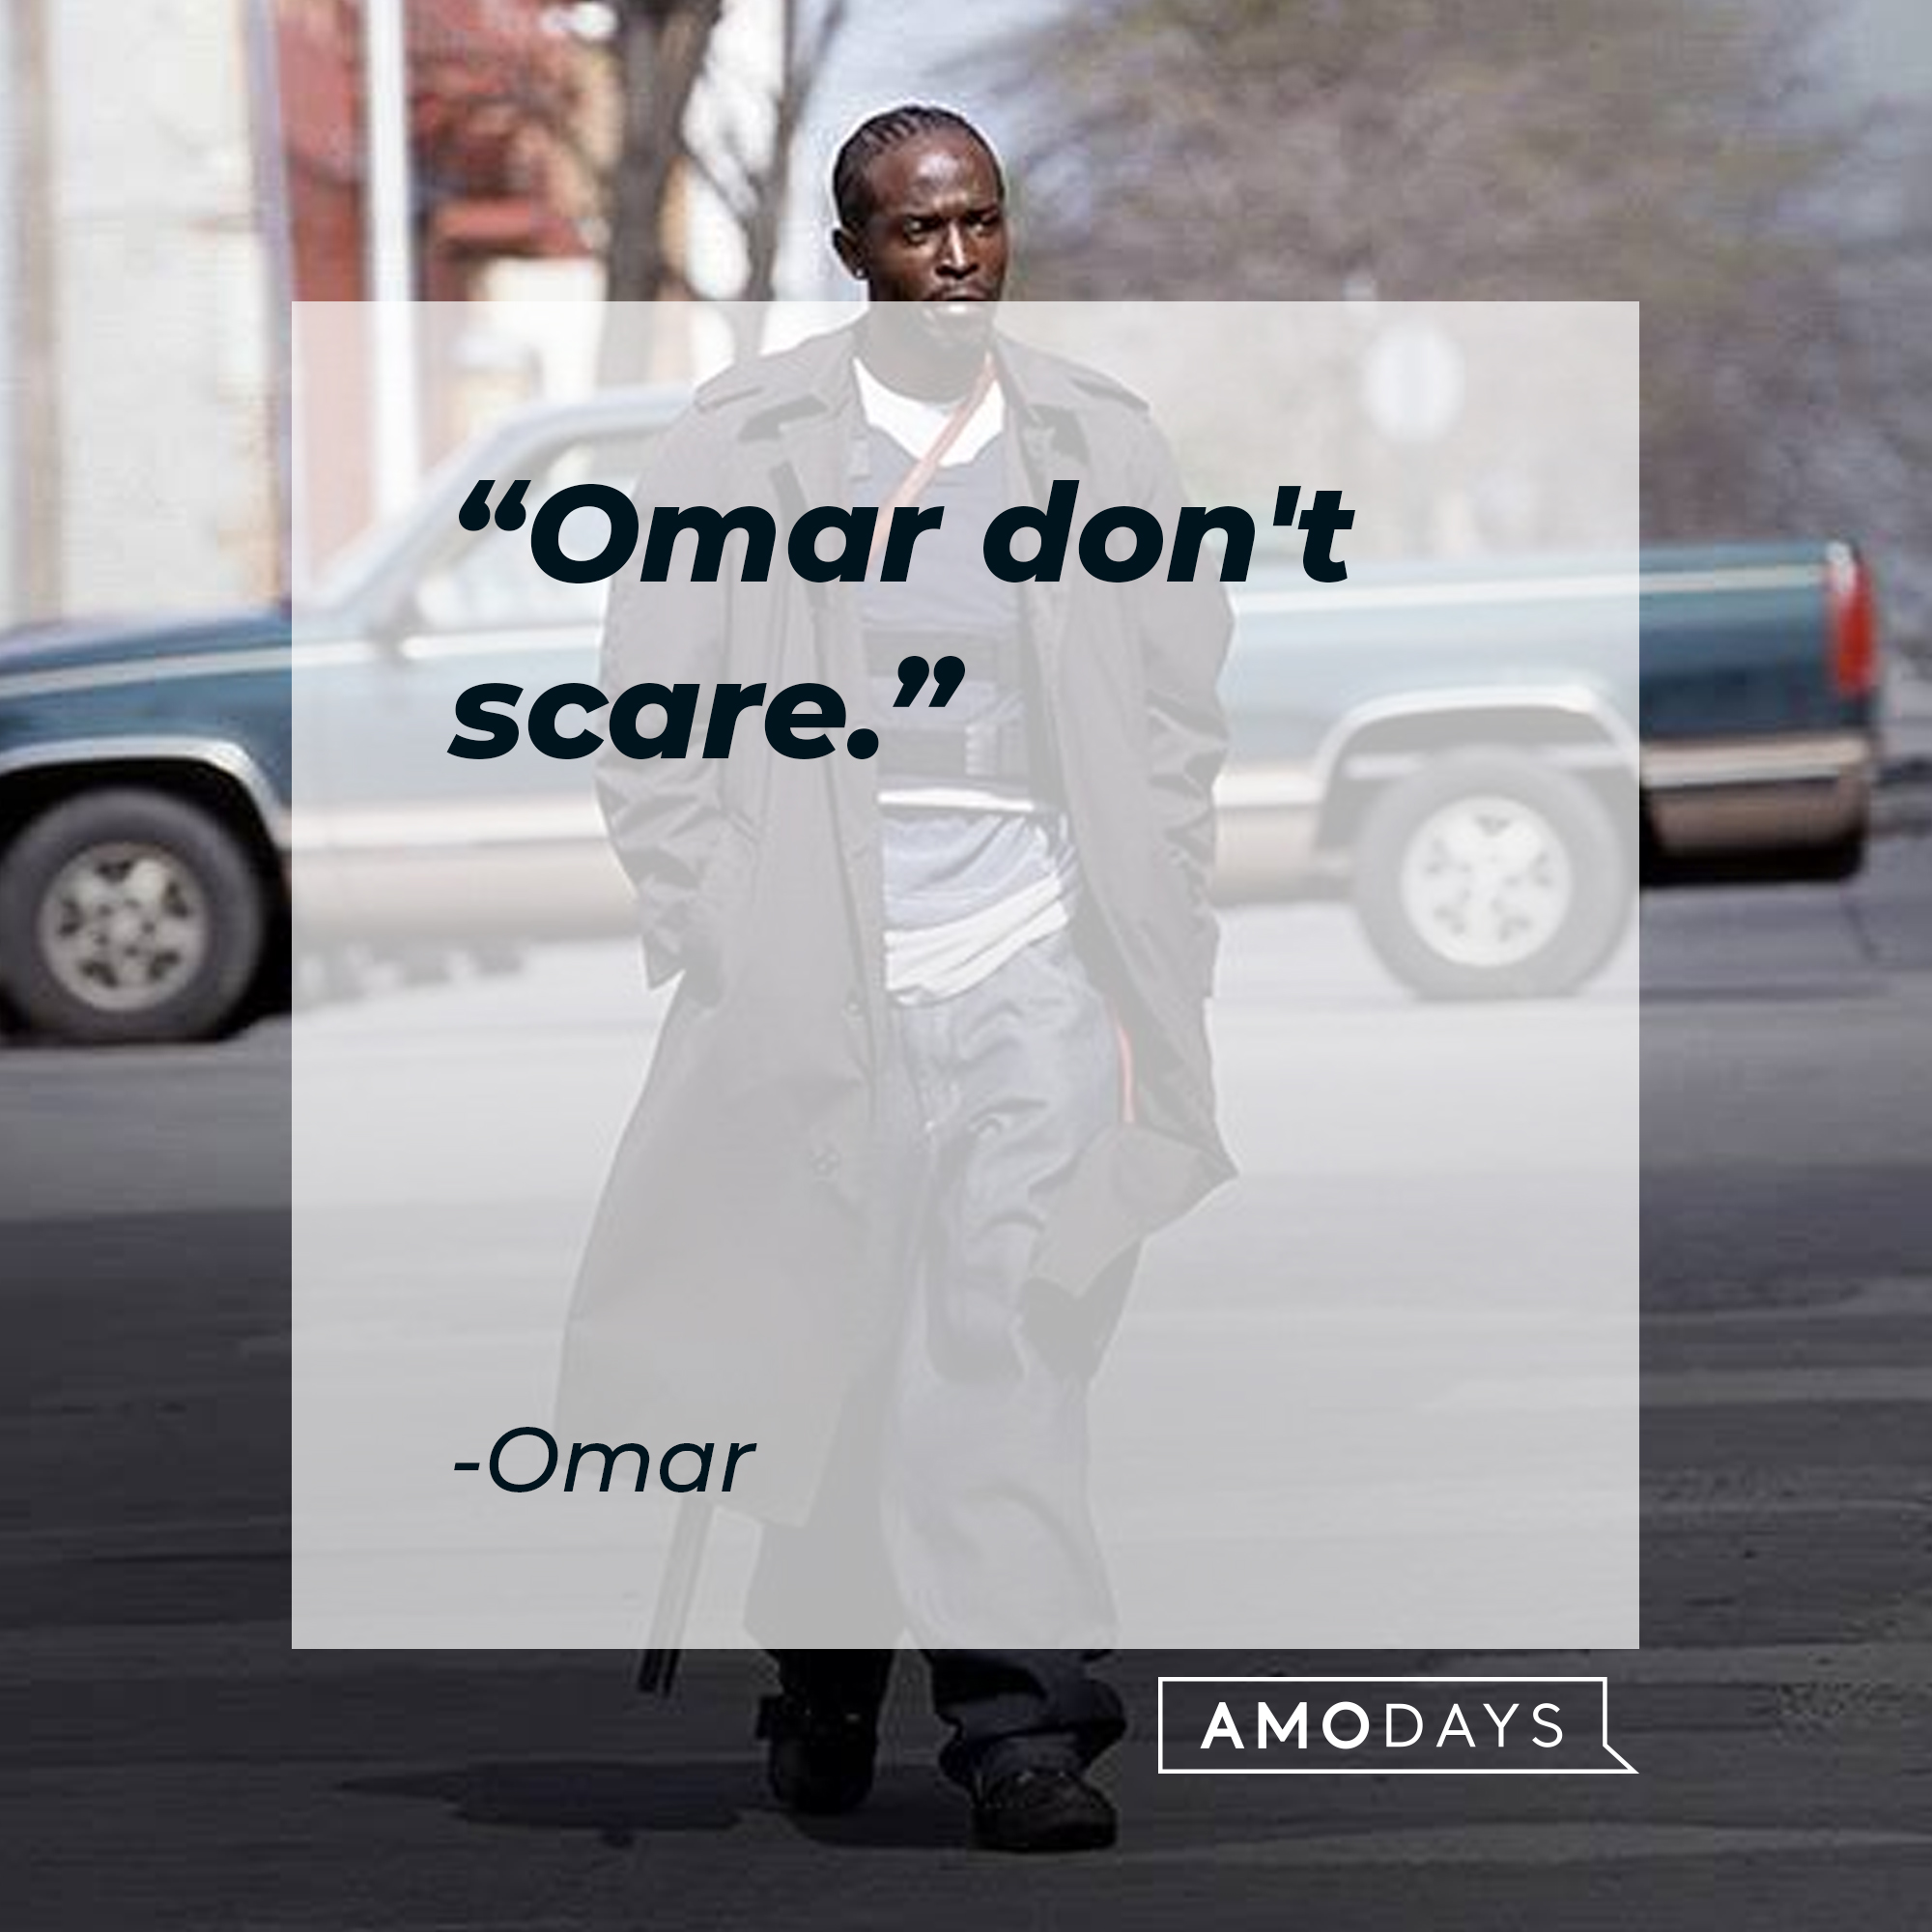 Omar's quote: "Omar don't scare." | Source: facebook.com/TheWire